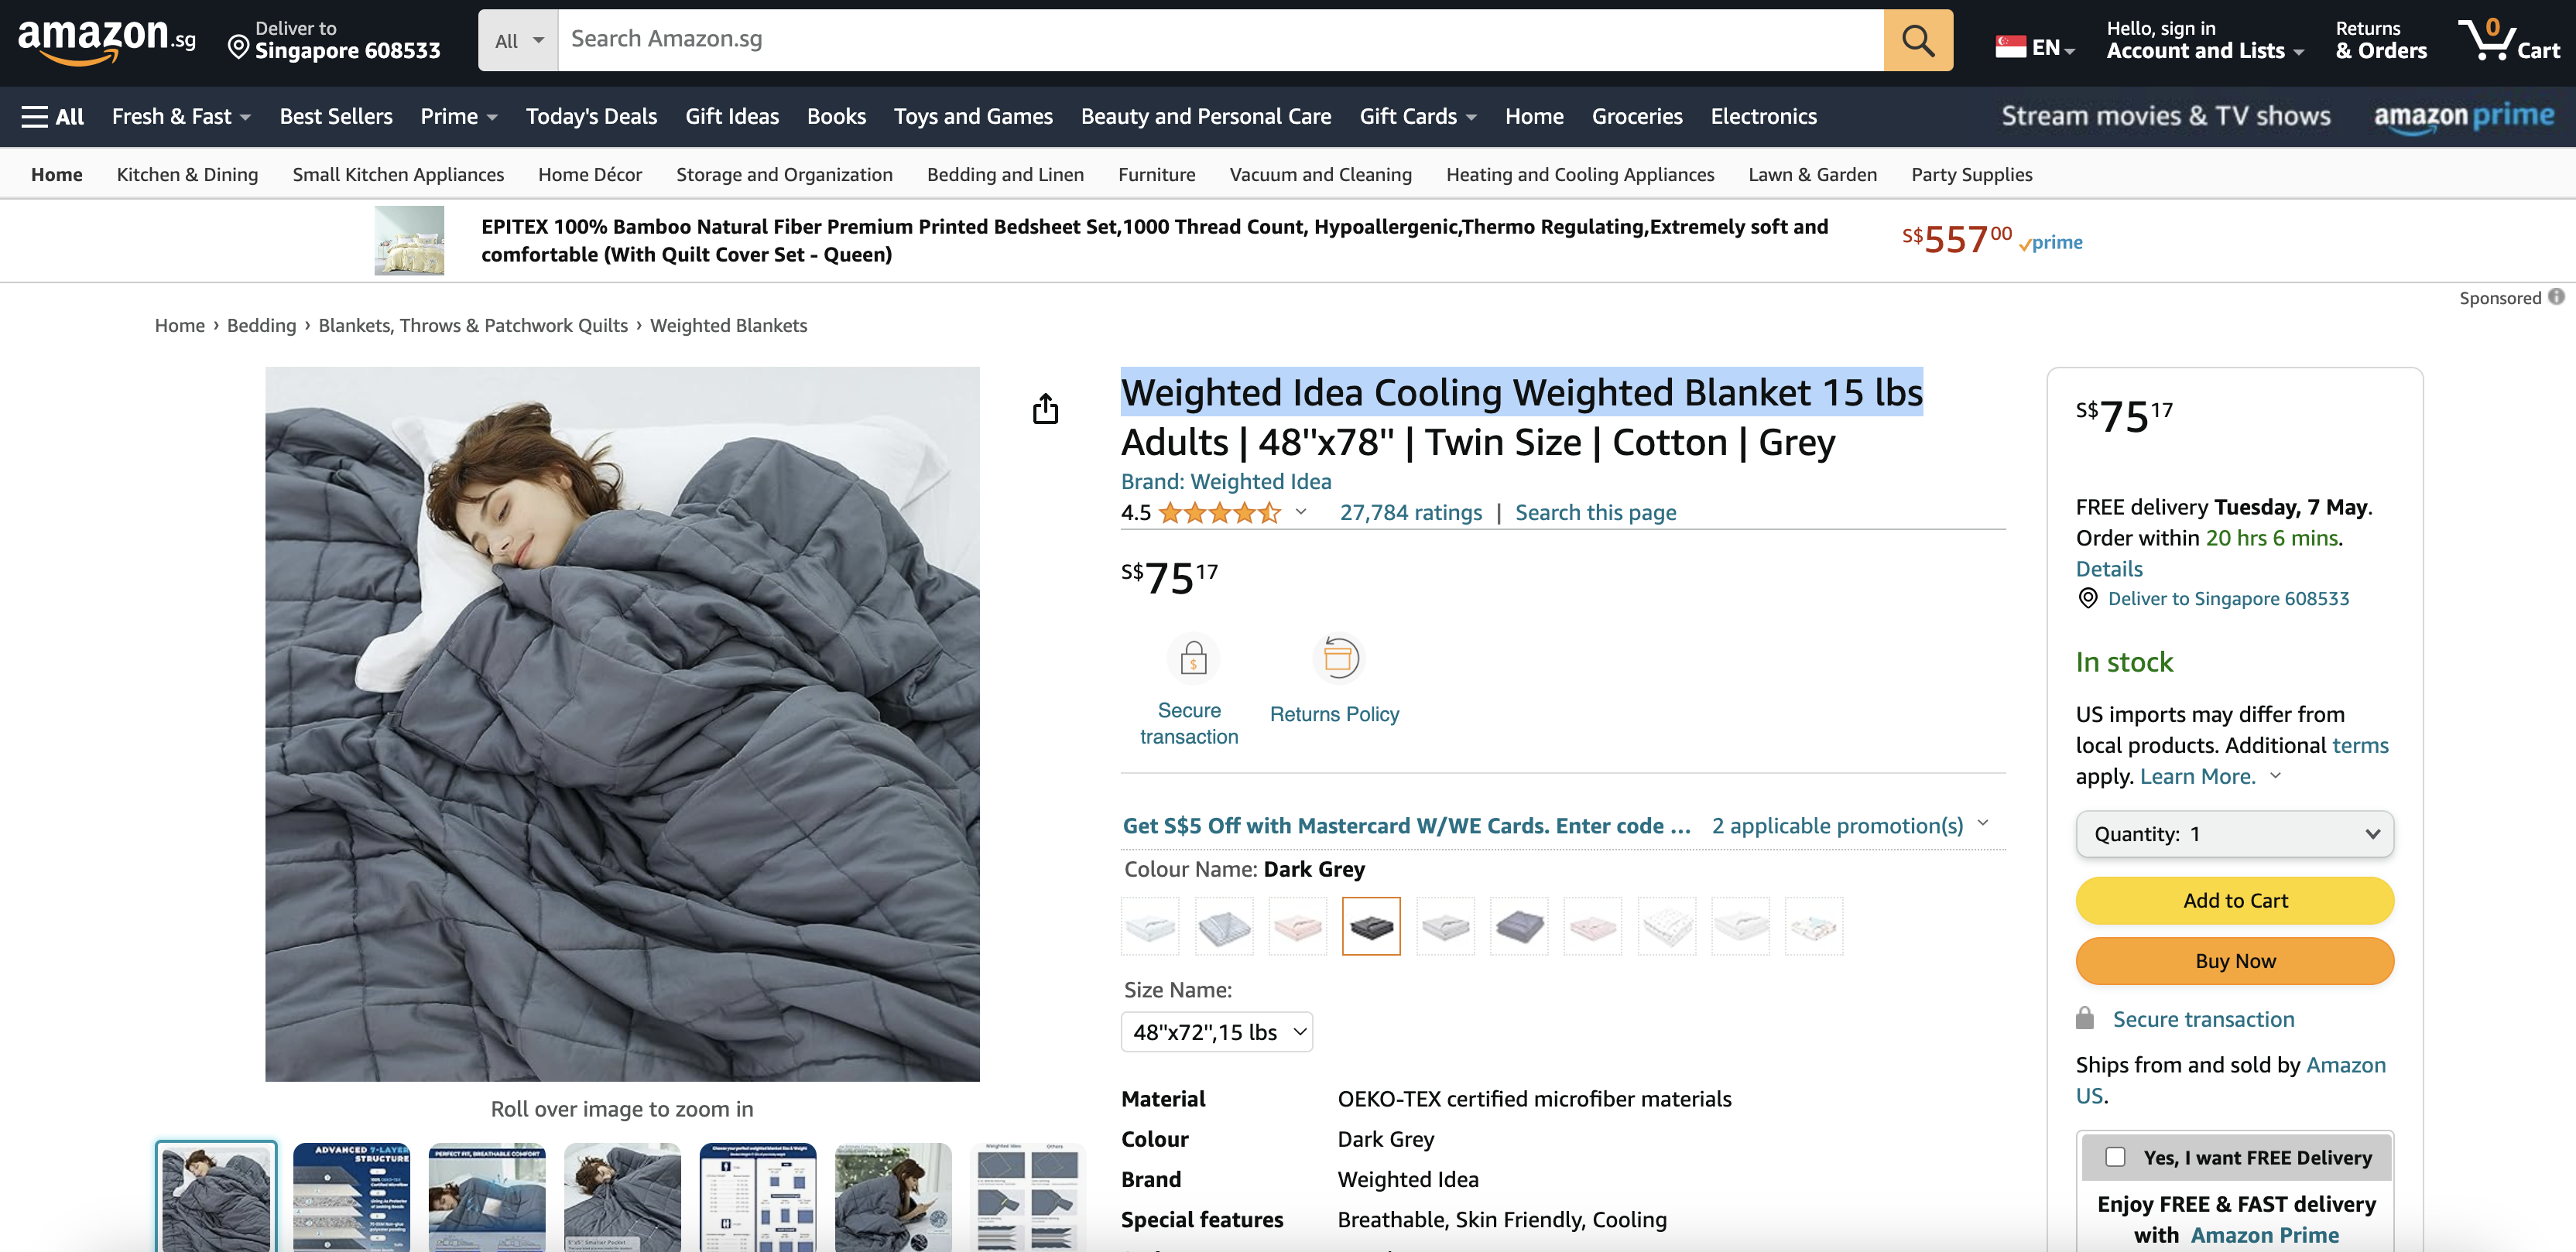 Weighted Idea Cooling Weighted Blanket 15 lbs